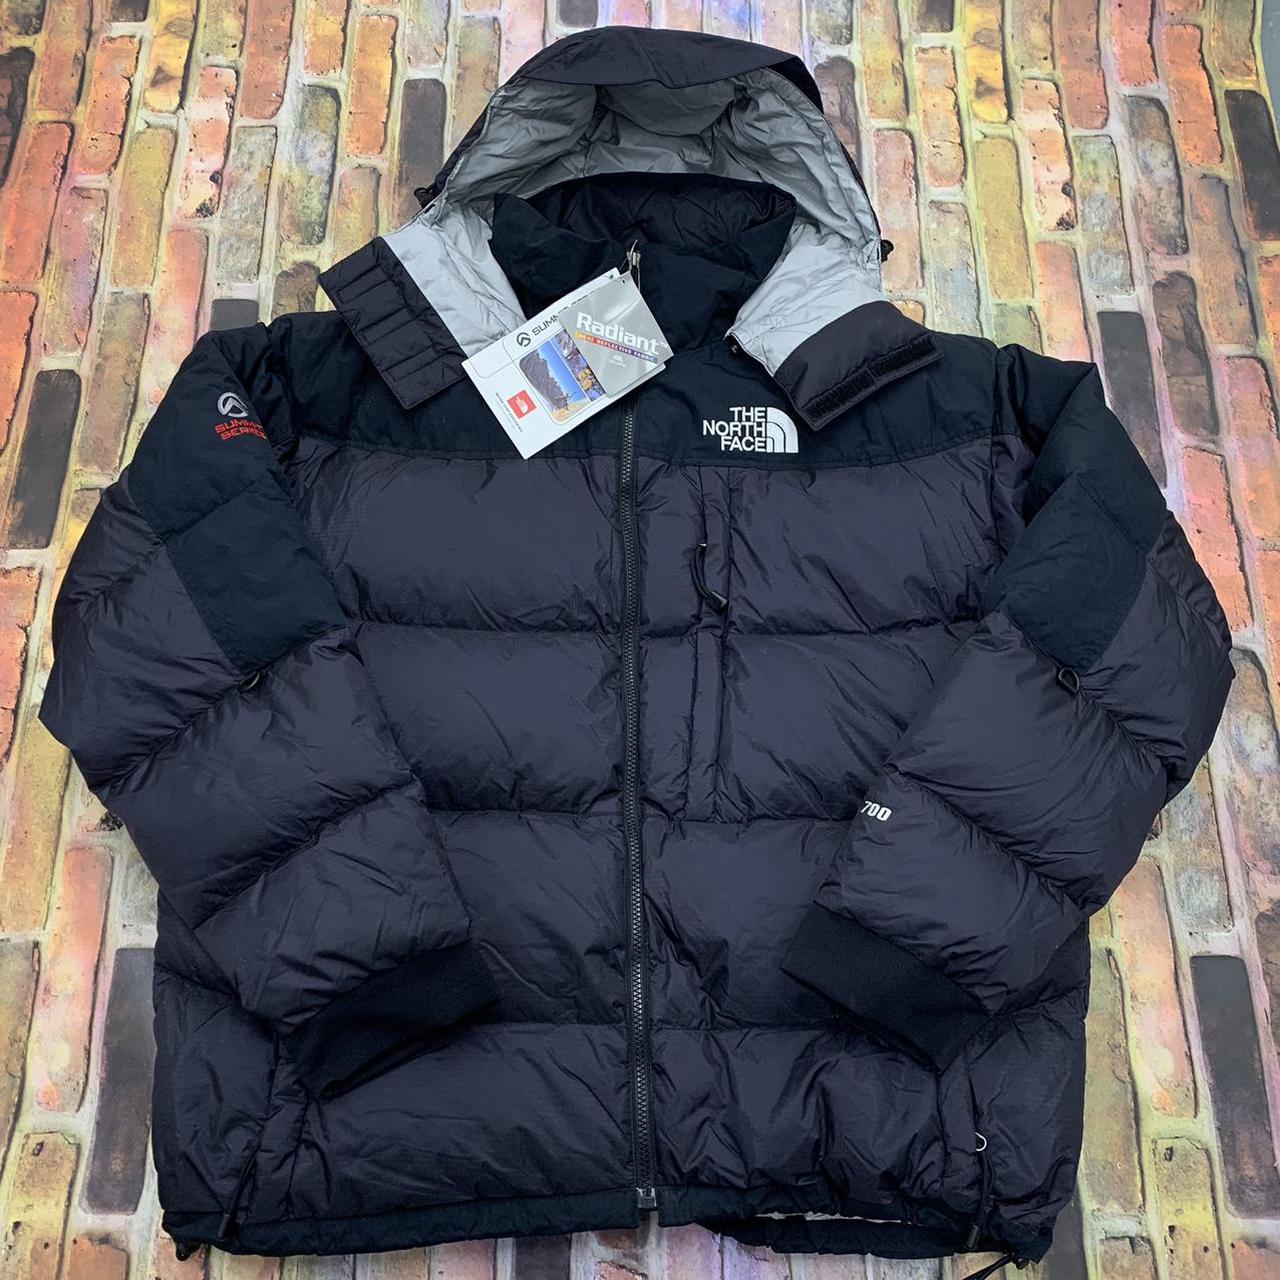 The North Face 700 Summit Series puffer jacket in... - Depop